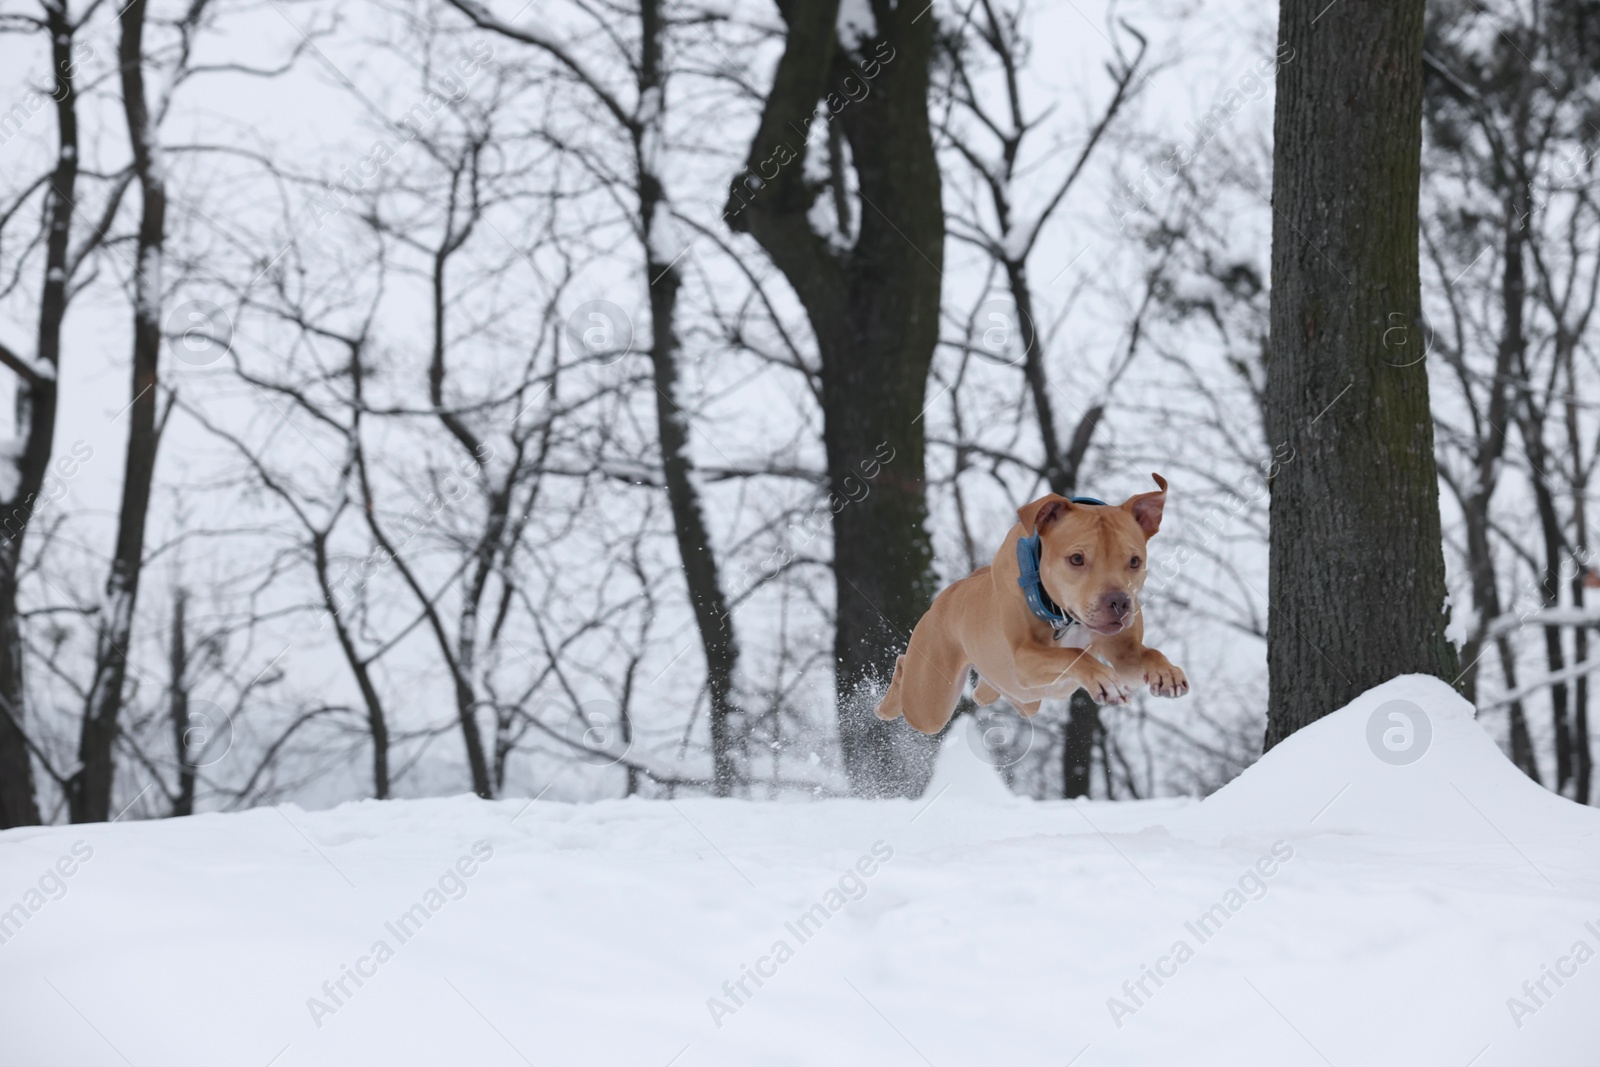 Photo of Cute dog jumping in snowy forest. Space for text